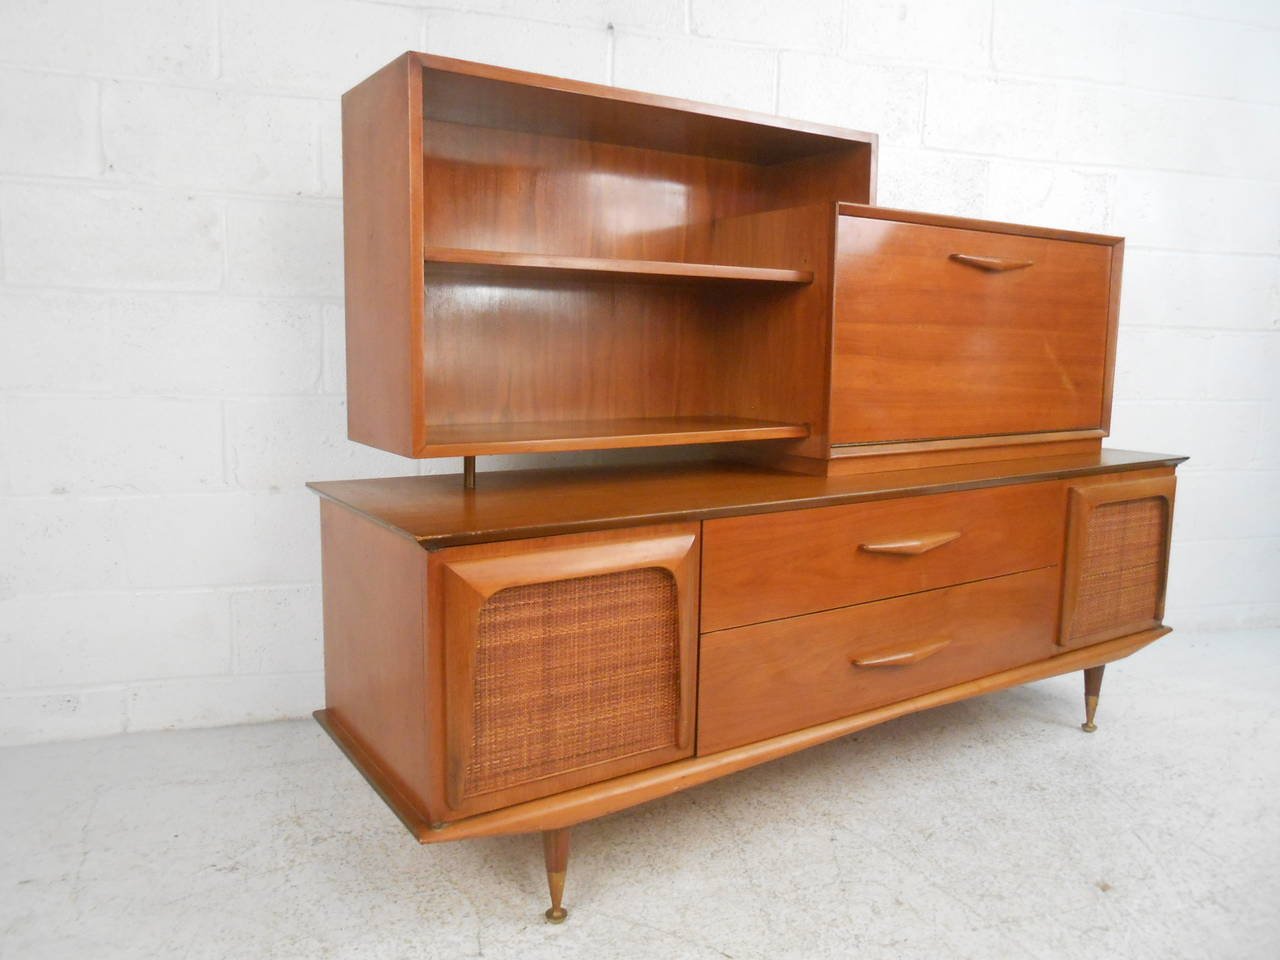 American Unique Mid-Century Modern Sideboard Shelving Display With Dropfront Bar